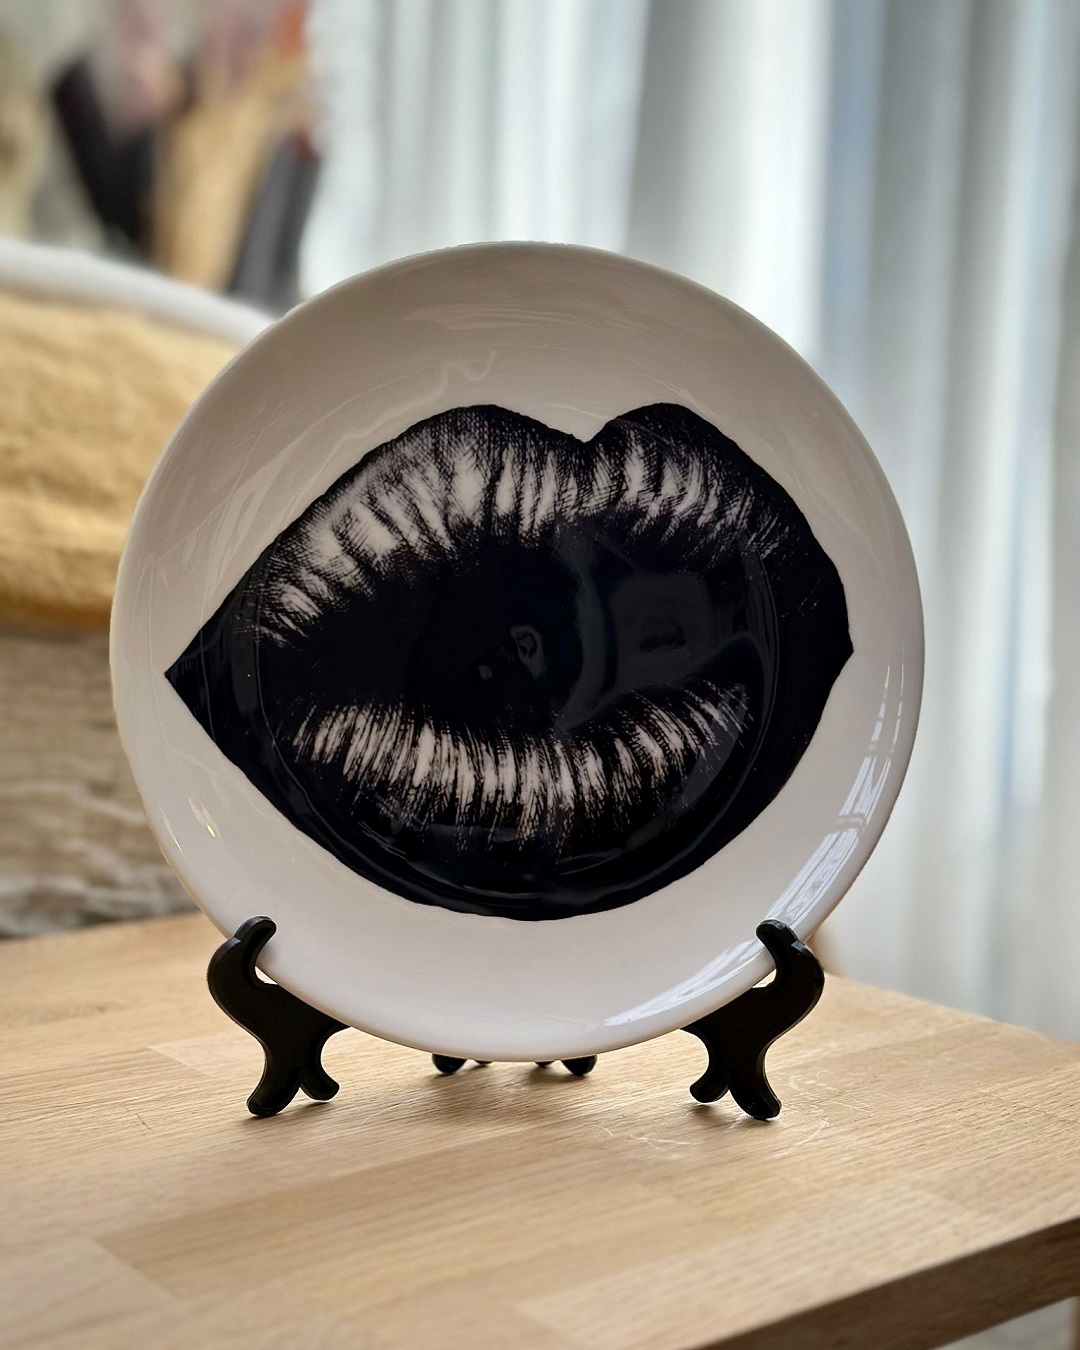 Round white plate in plate stand with black lips on it